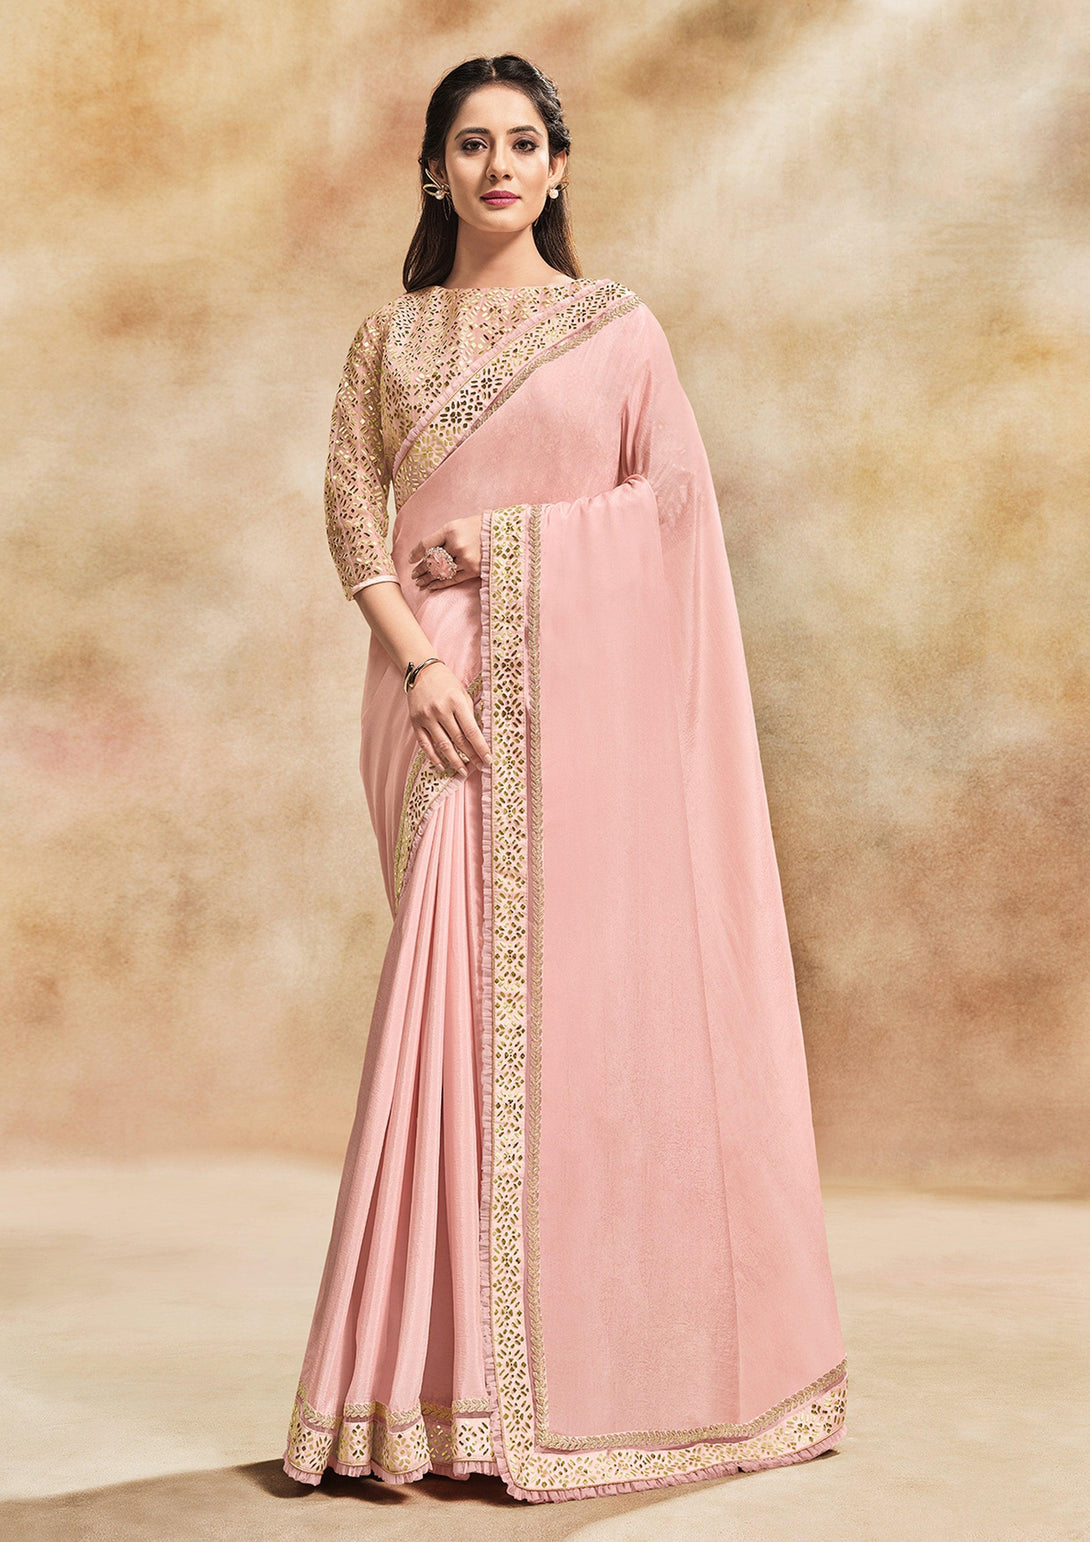 Gorgeous Reception Wear Georgette Base Pink Saree With Boat Neck Blouse - Indiakreations